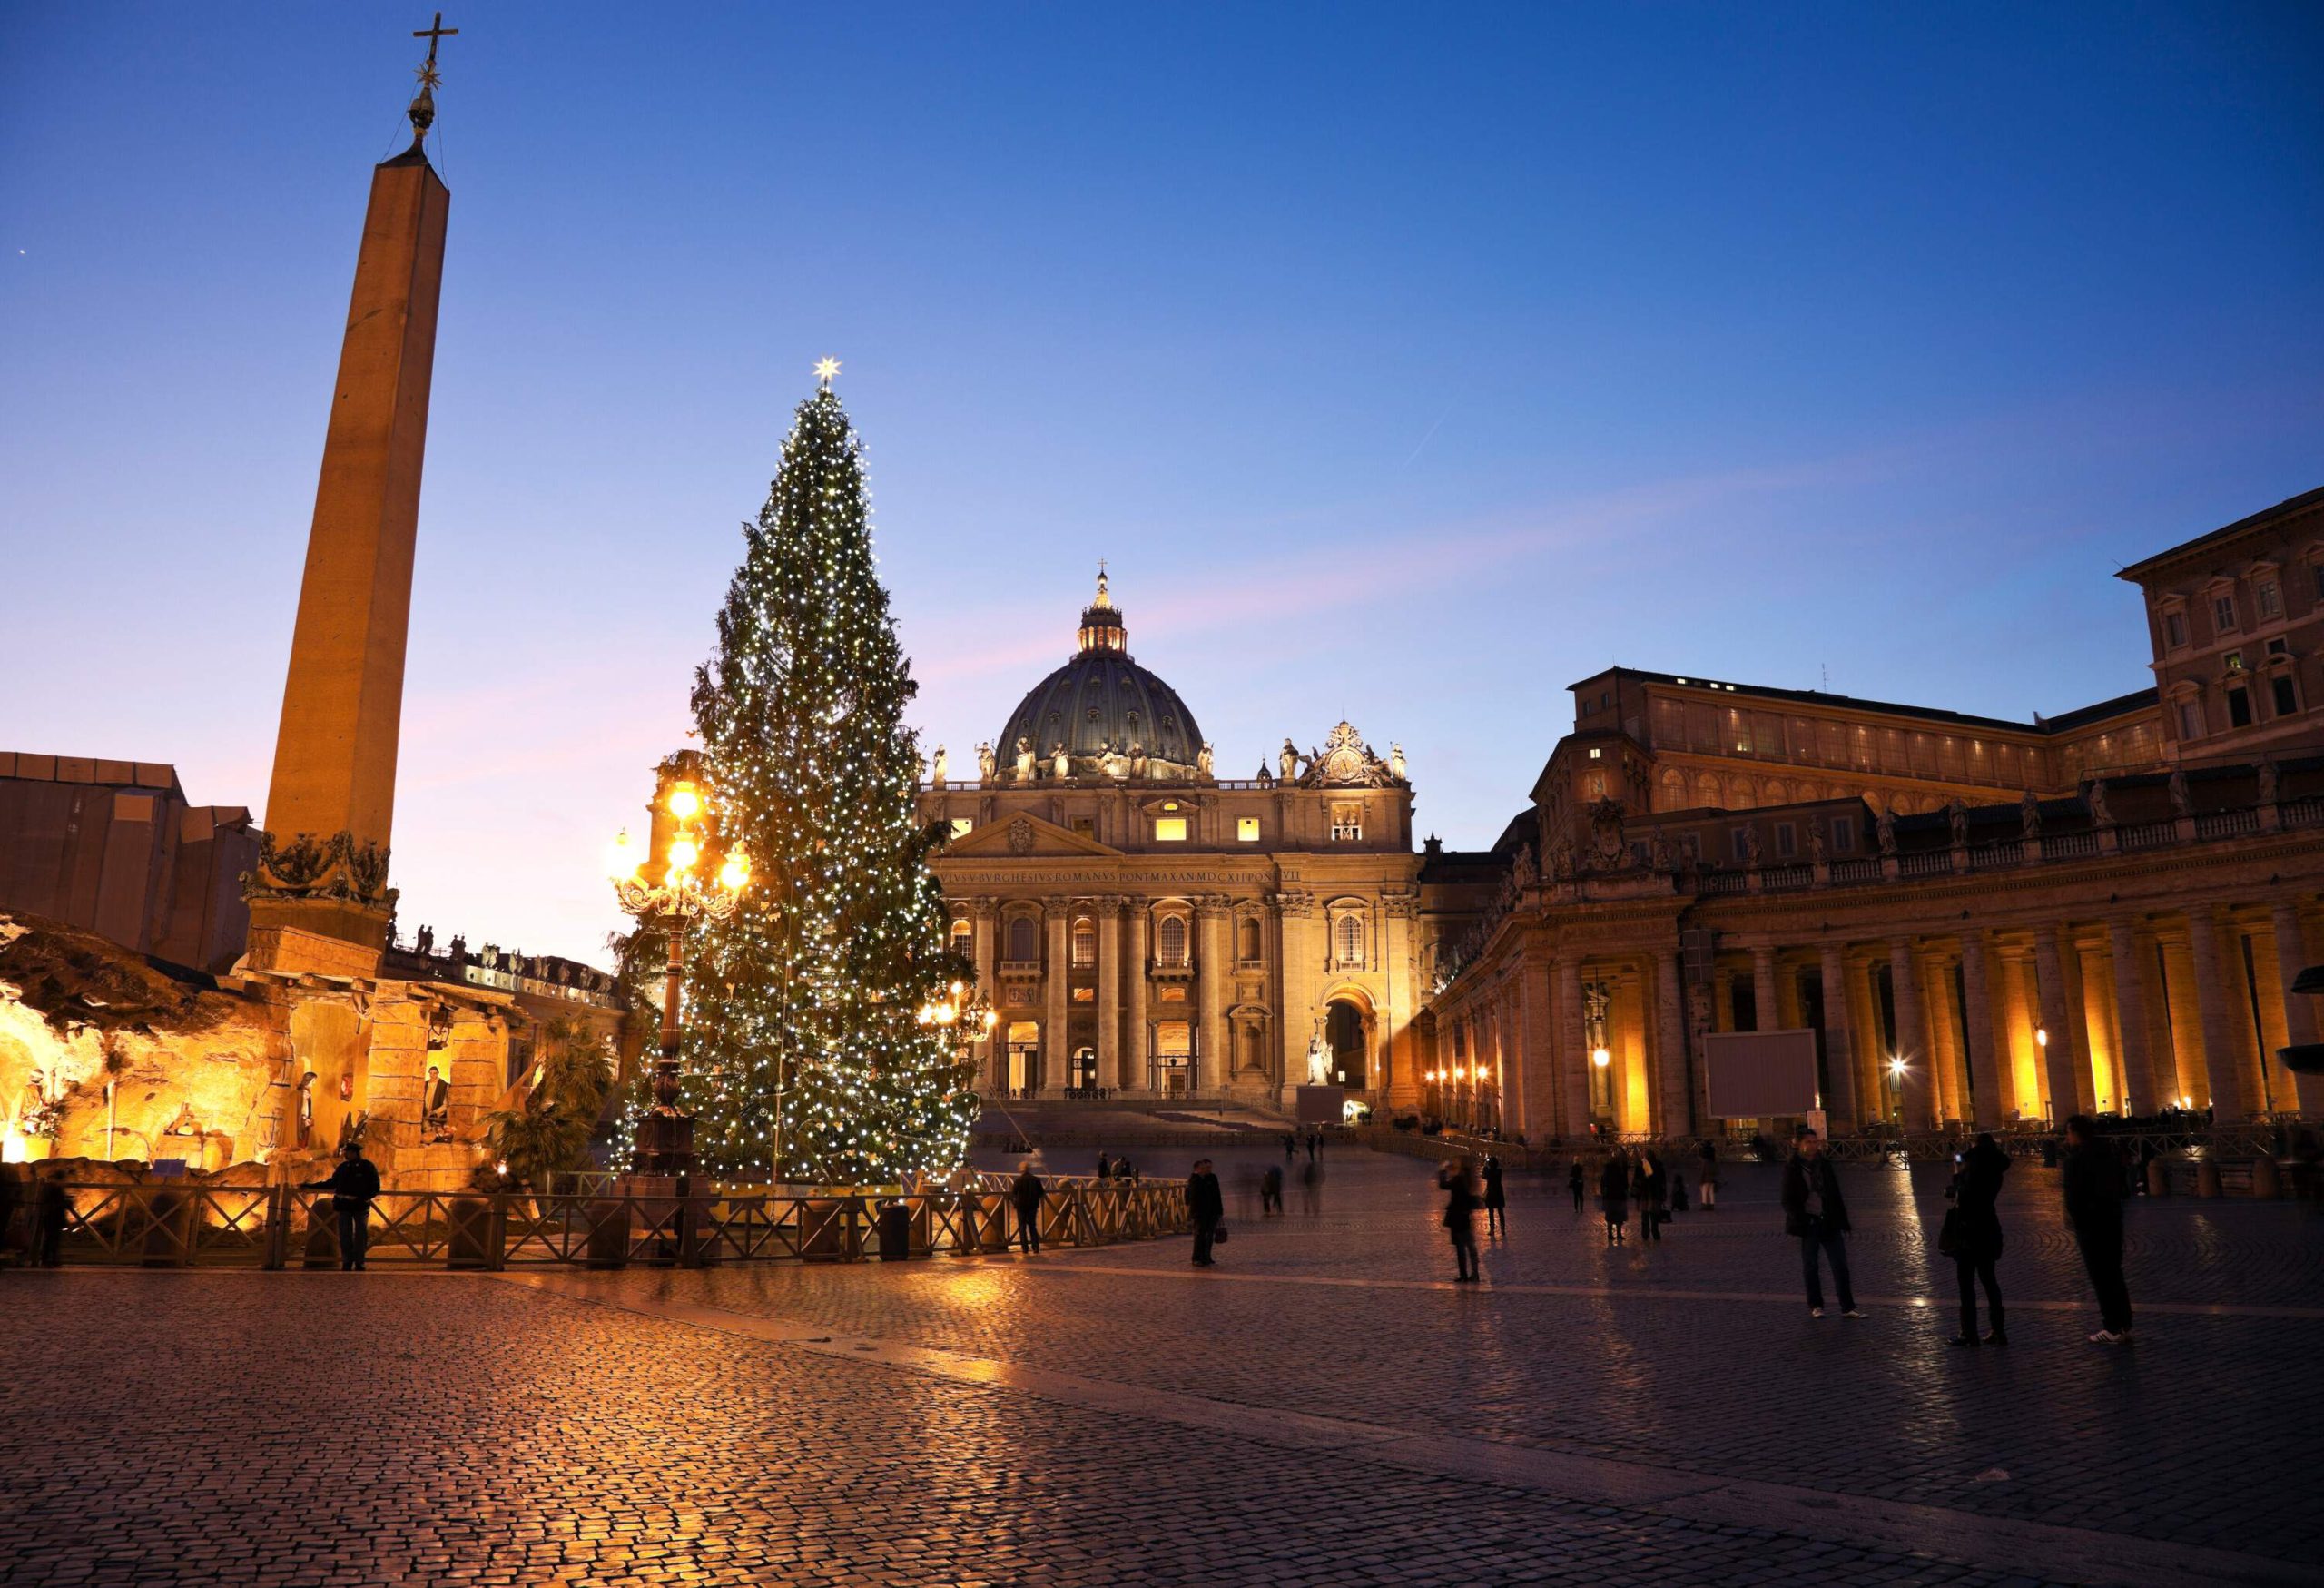 A giant lit Christmas tree adjacent to an ancient Egyptian obelisk in Saint Peter's Square overlooking St. Peter's Basilica in Rome, Vatican City.